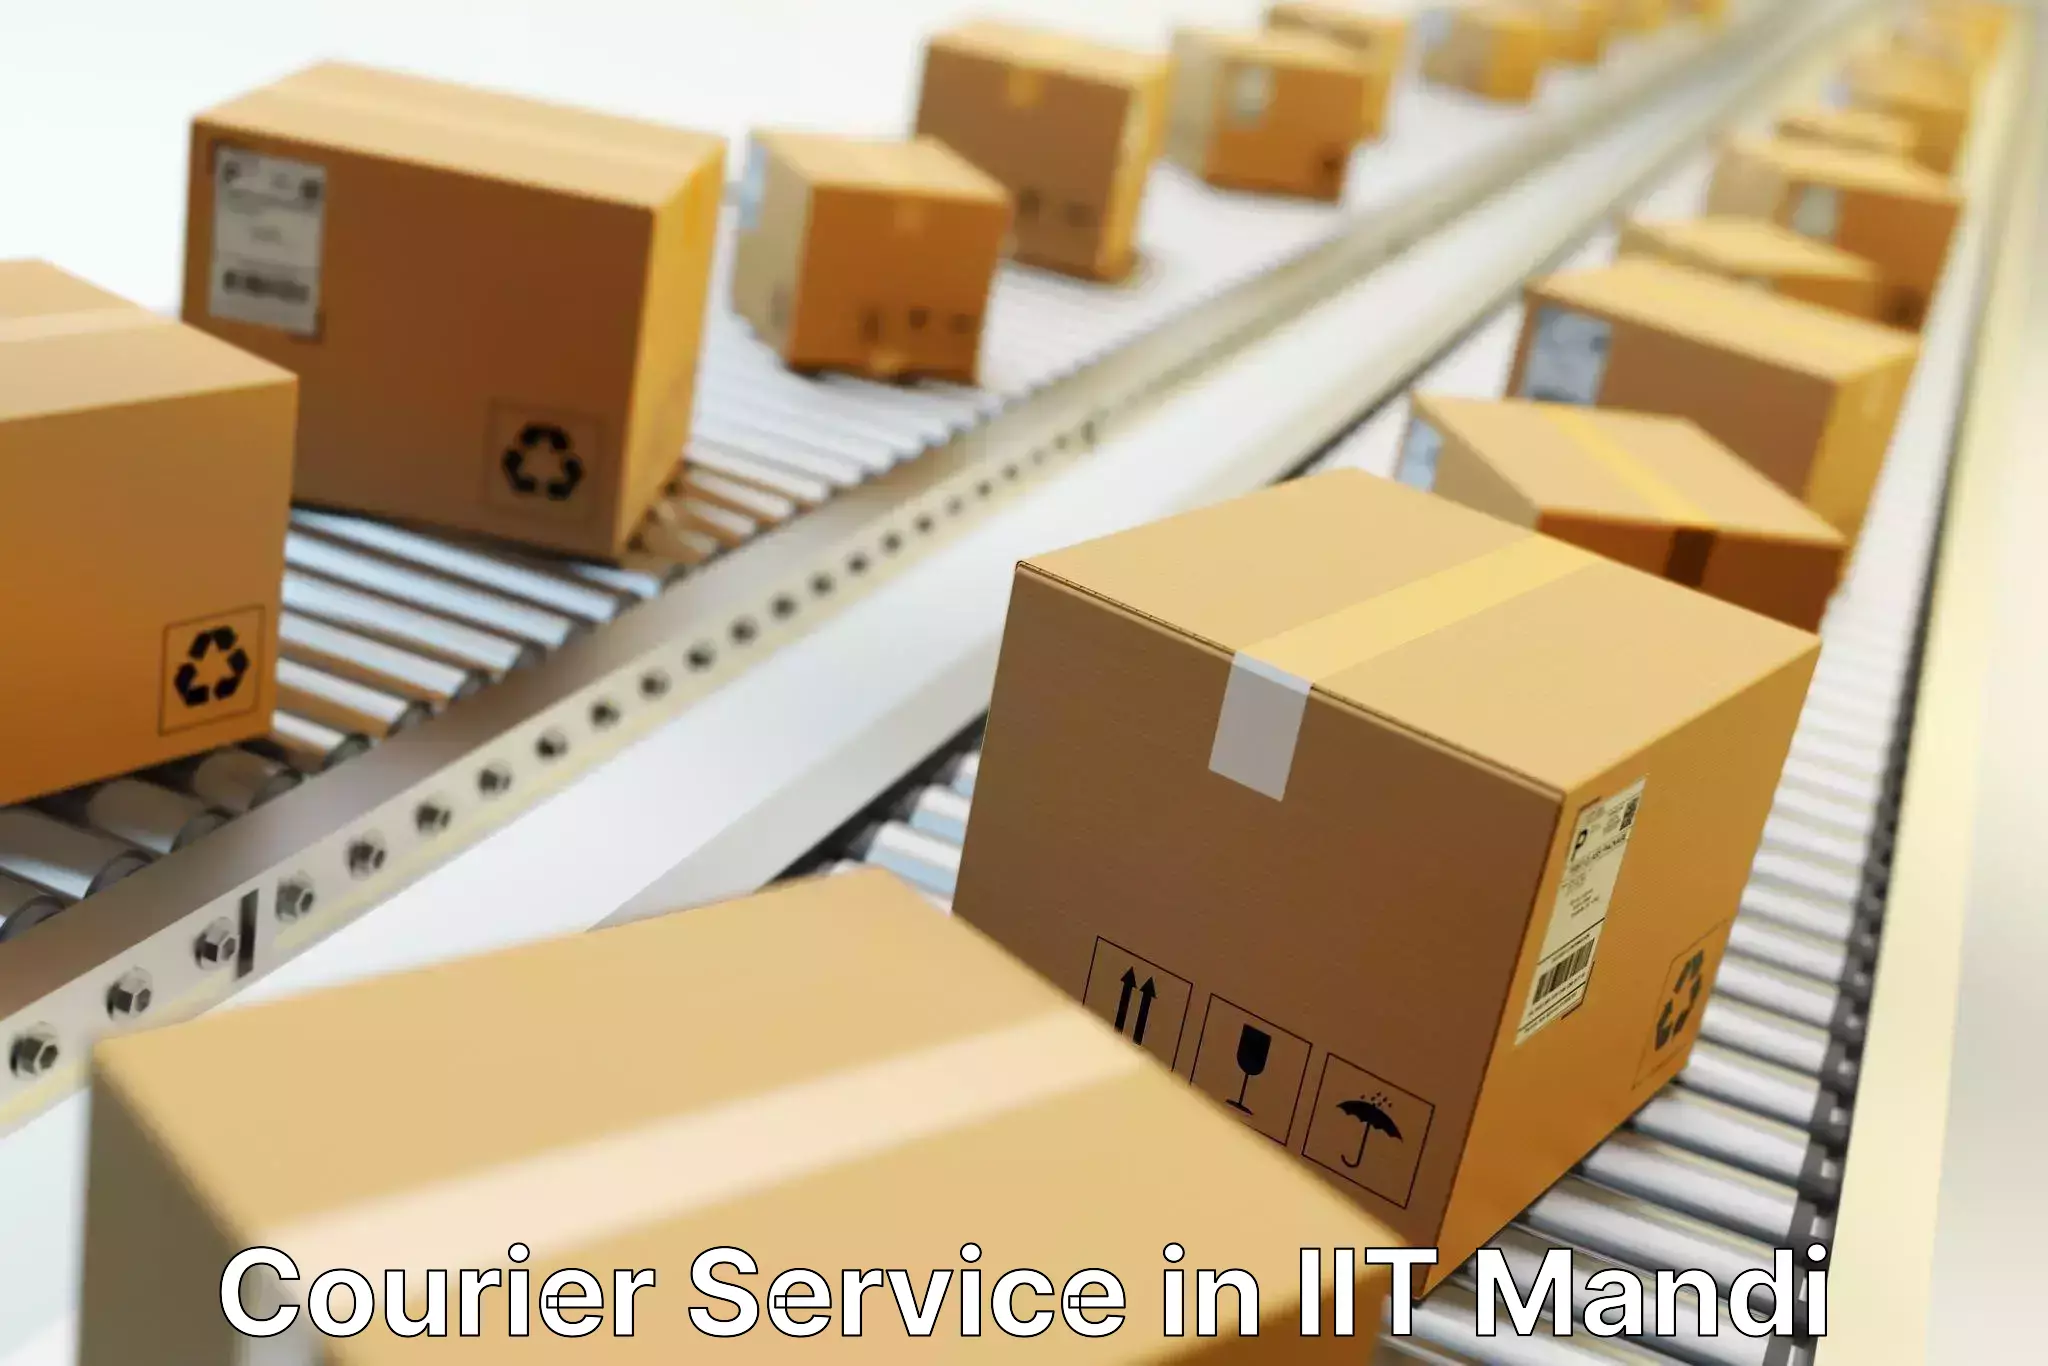 Courier services in IIT Mandi